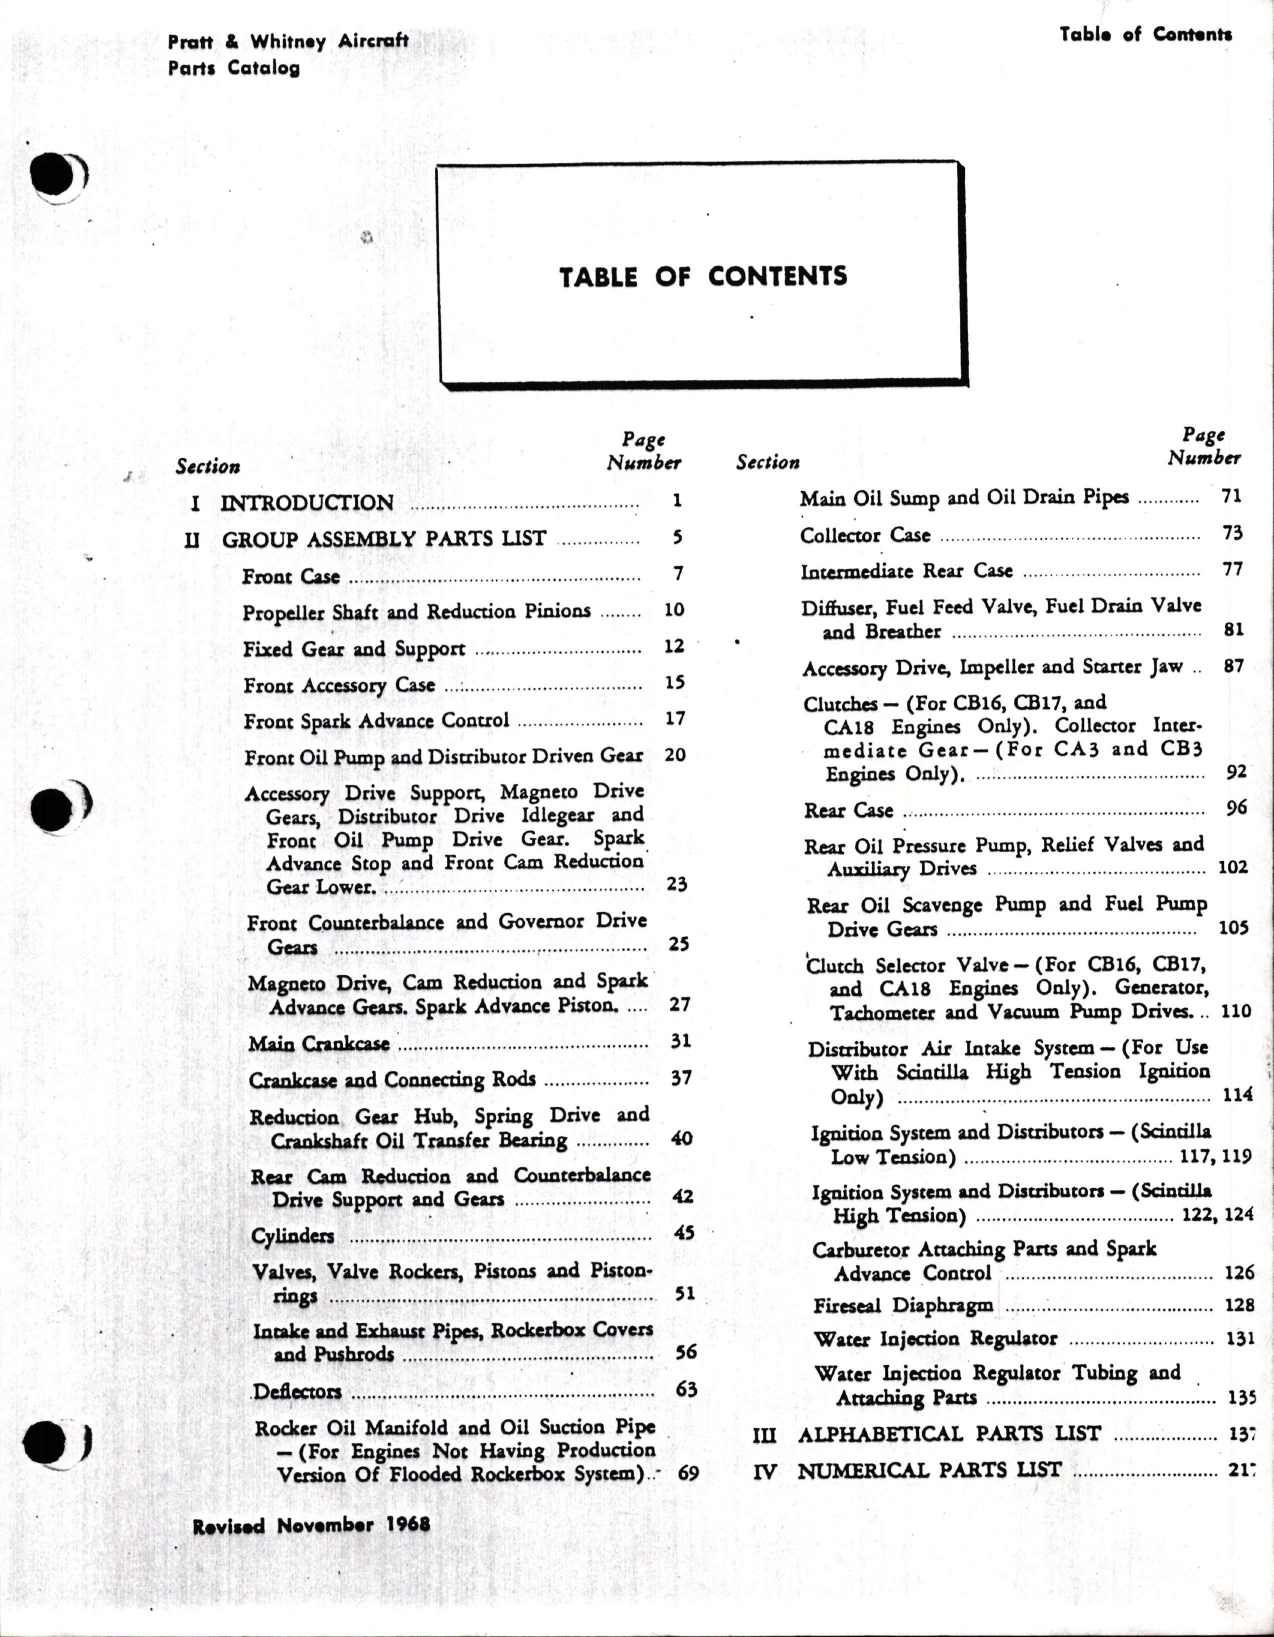 Sample page 5 from AirCorps Library document: Illustrated Parts Catalog for Double Wasp - CA-3, CA18, CB3, CB16, and CB17 Engines